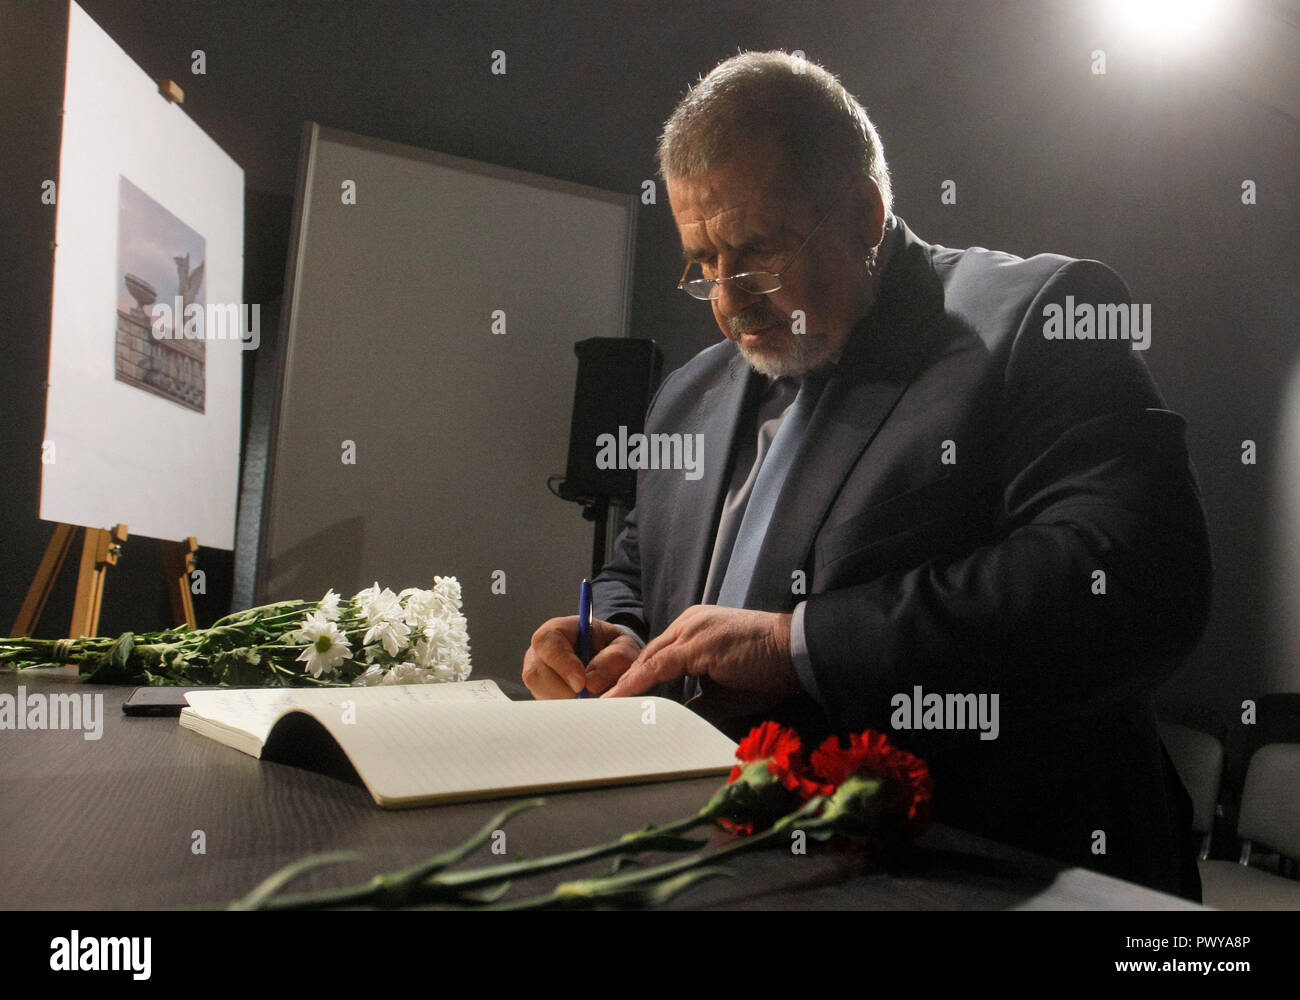 Refat Chubarov, leader of the Crimean Tatar national movement in Ukraine and worldwide is seen signing a condolence book as a sign of mourning to the victims of the attack during the commemoration. Commemorating the victims of an 18-year-old student who strode into his vocational college in Kerch in the Crimea, then pulled out a shotgun and opened fire, killing about 20 students and teachers and wounding about 74 others before killing himself, according the media. Stock Photo